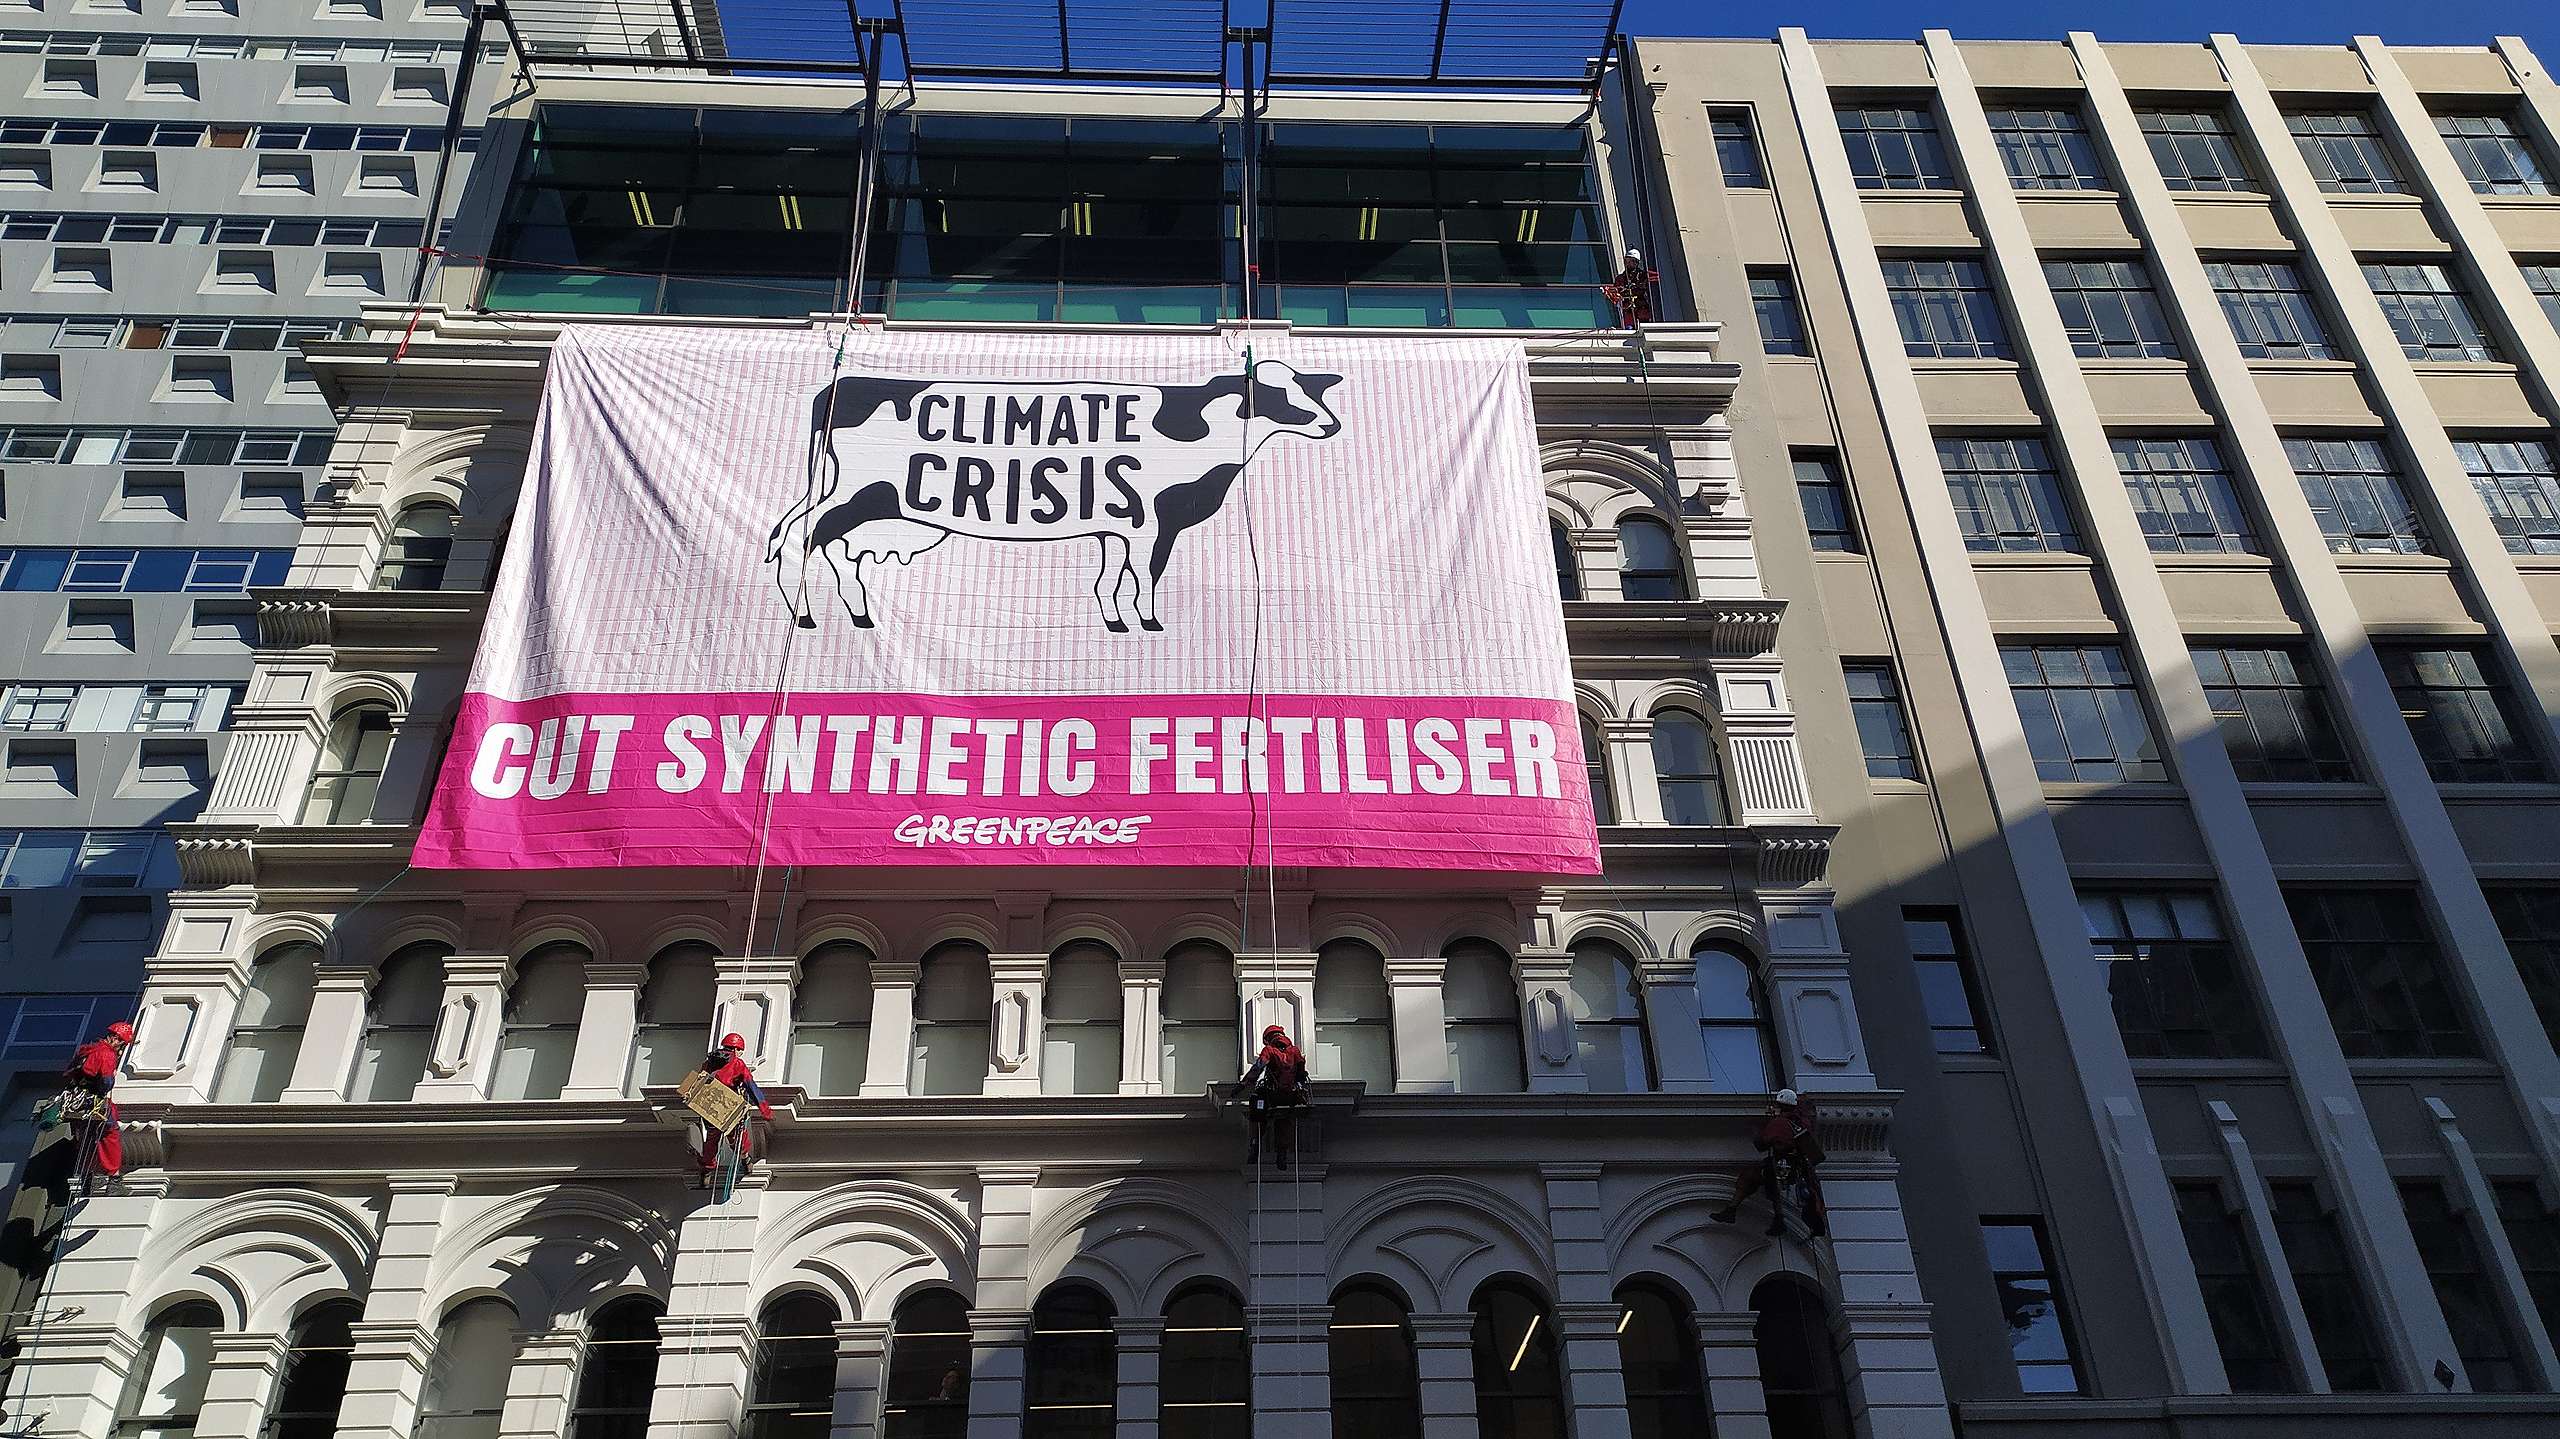 Greenpeace Greenpeace activists climb Fertiliser Association building to highlight industrial dairying's role in climate crisis - Greenpeace Aotearoa